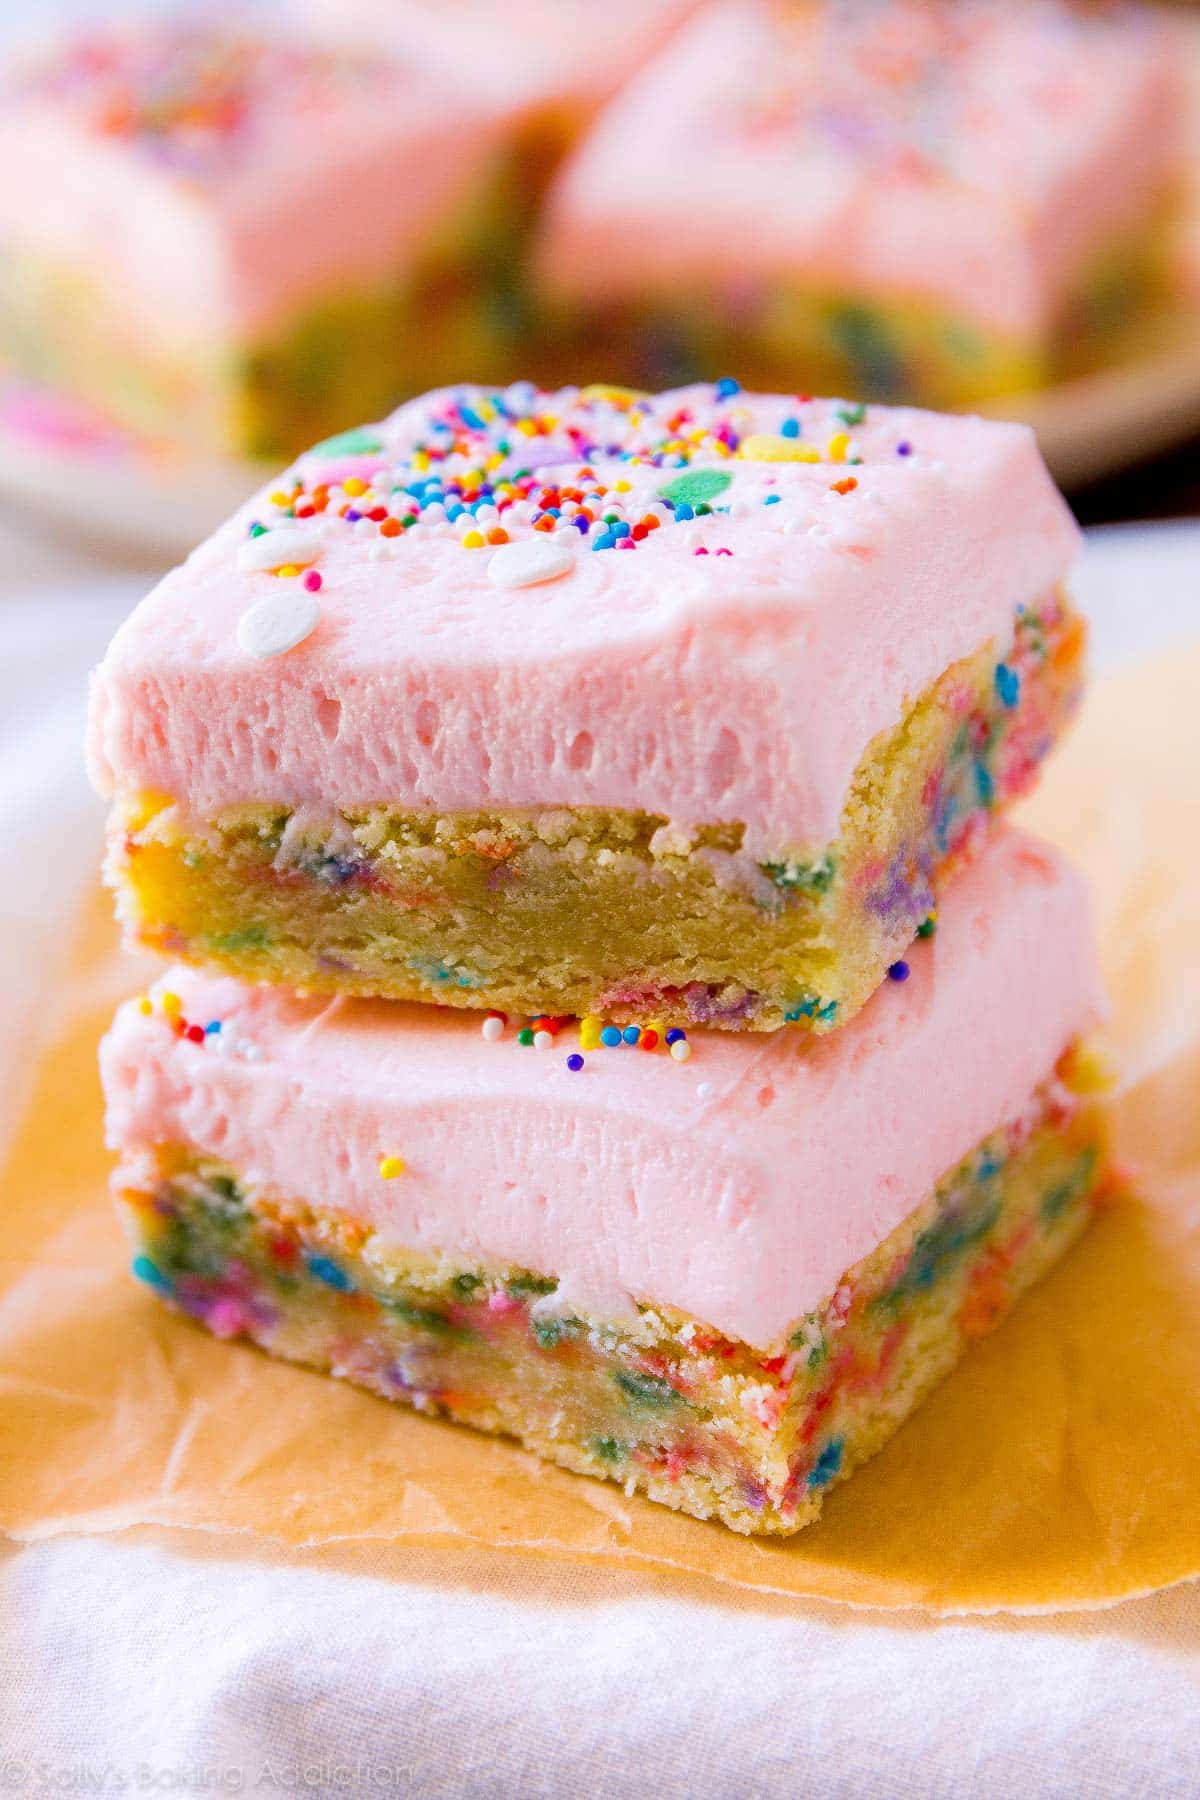 Frosted Sugar Cookie Bars - Sally’s Baking Addiction